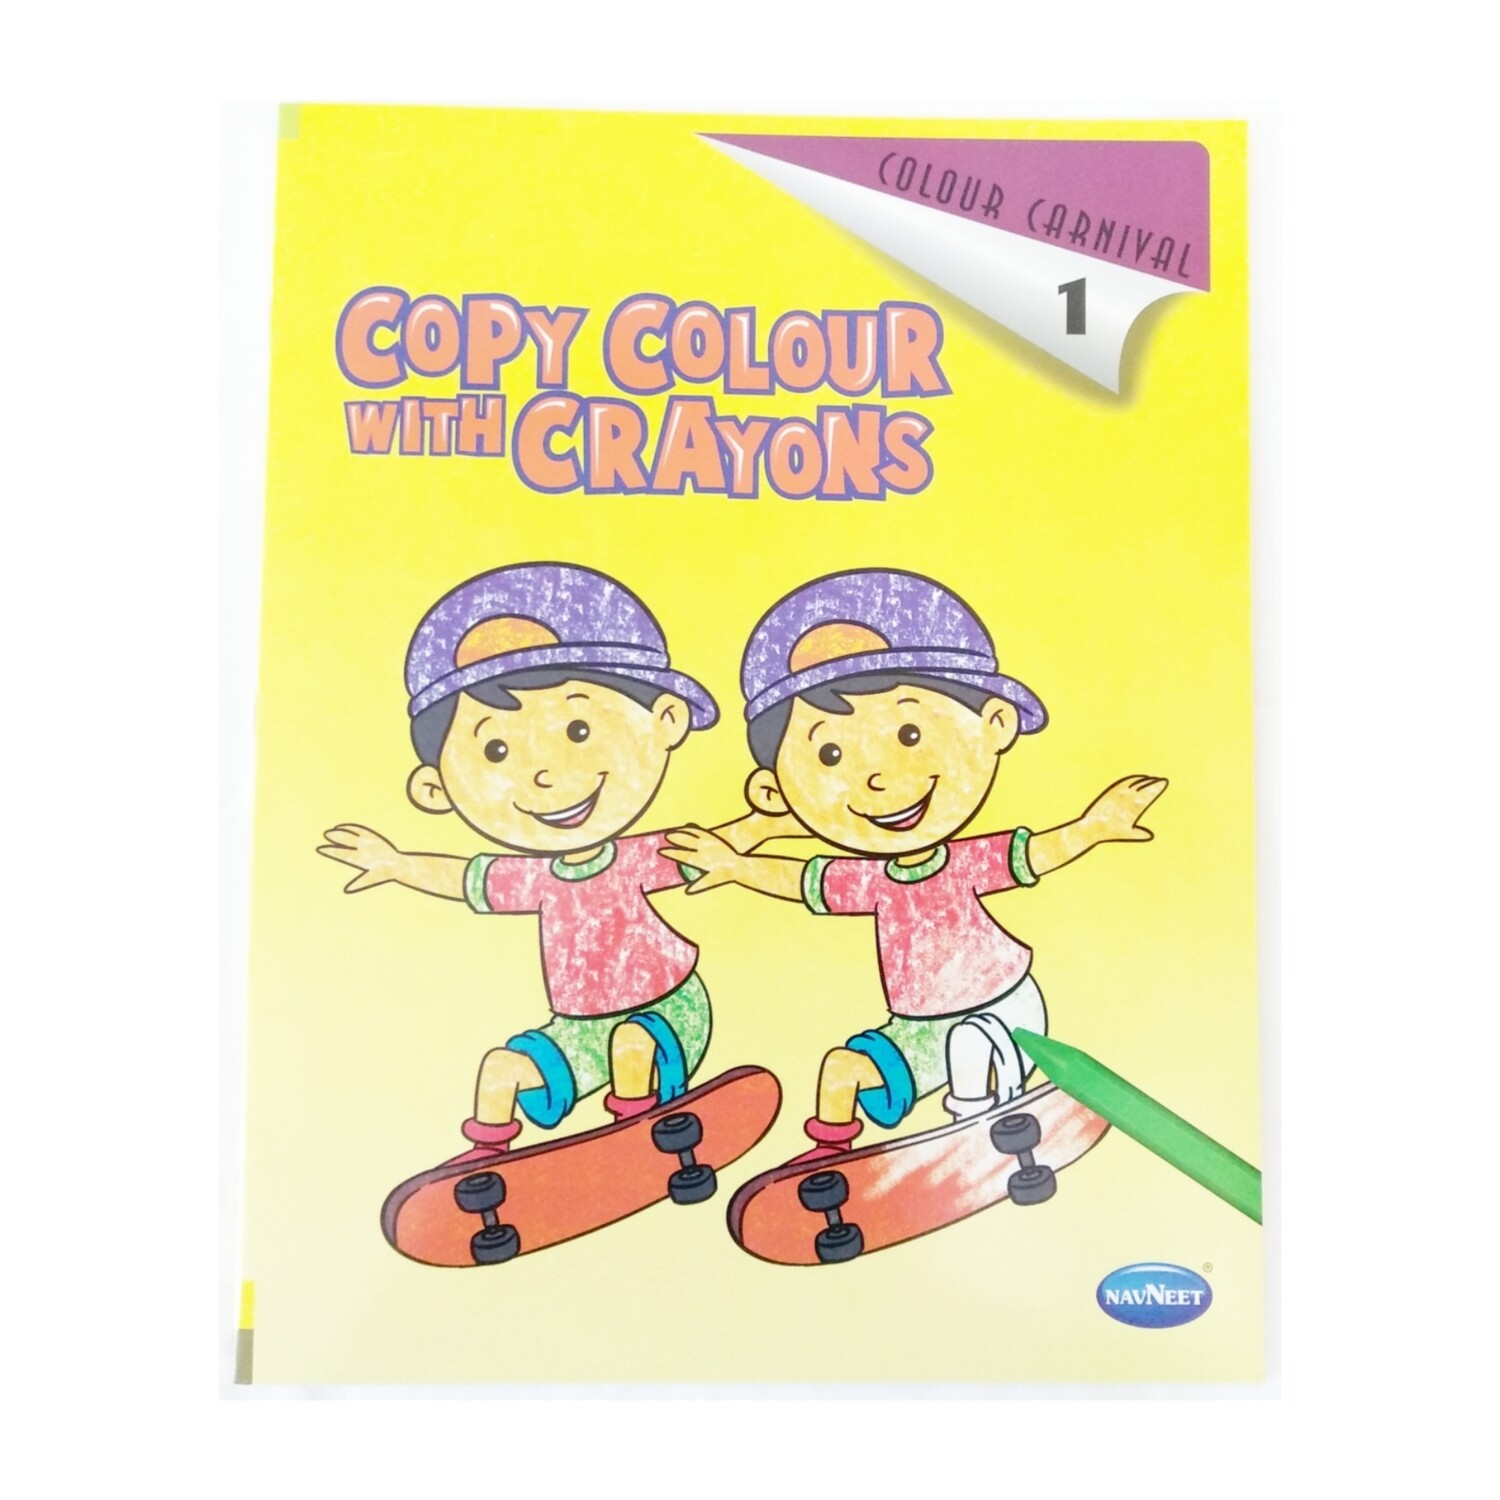 Colour Carnival (Copy Colour With Crayons) - Book 1